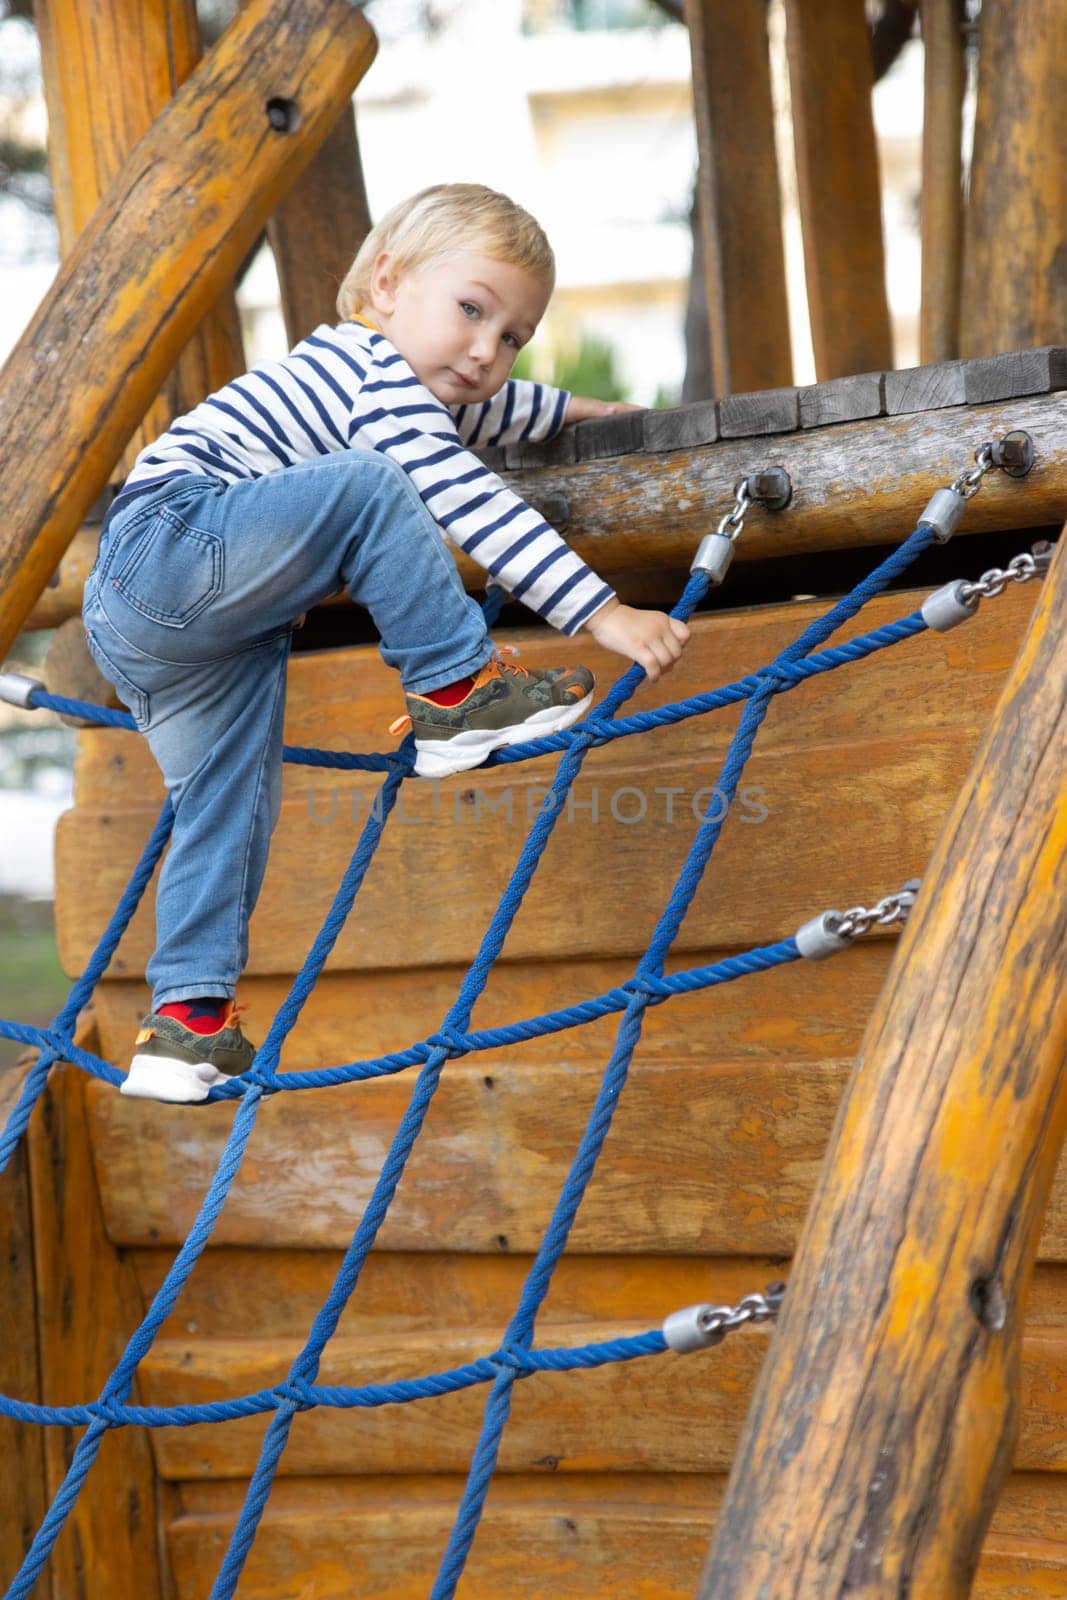 Cute little blonde boy playing on the playground - climbing a rope ladder and looking in the camera. Vertical shot